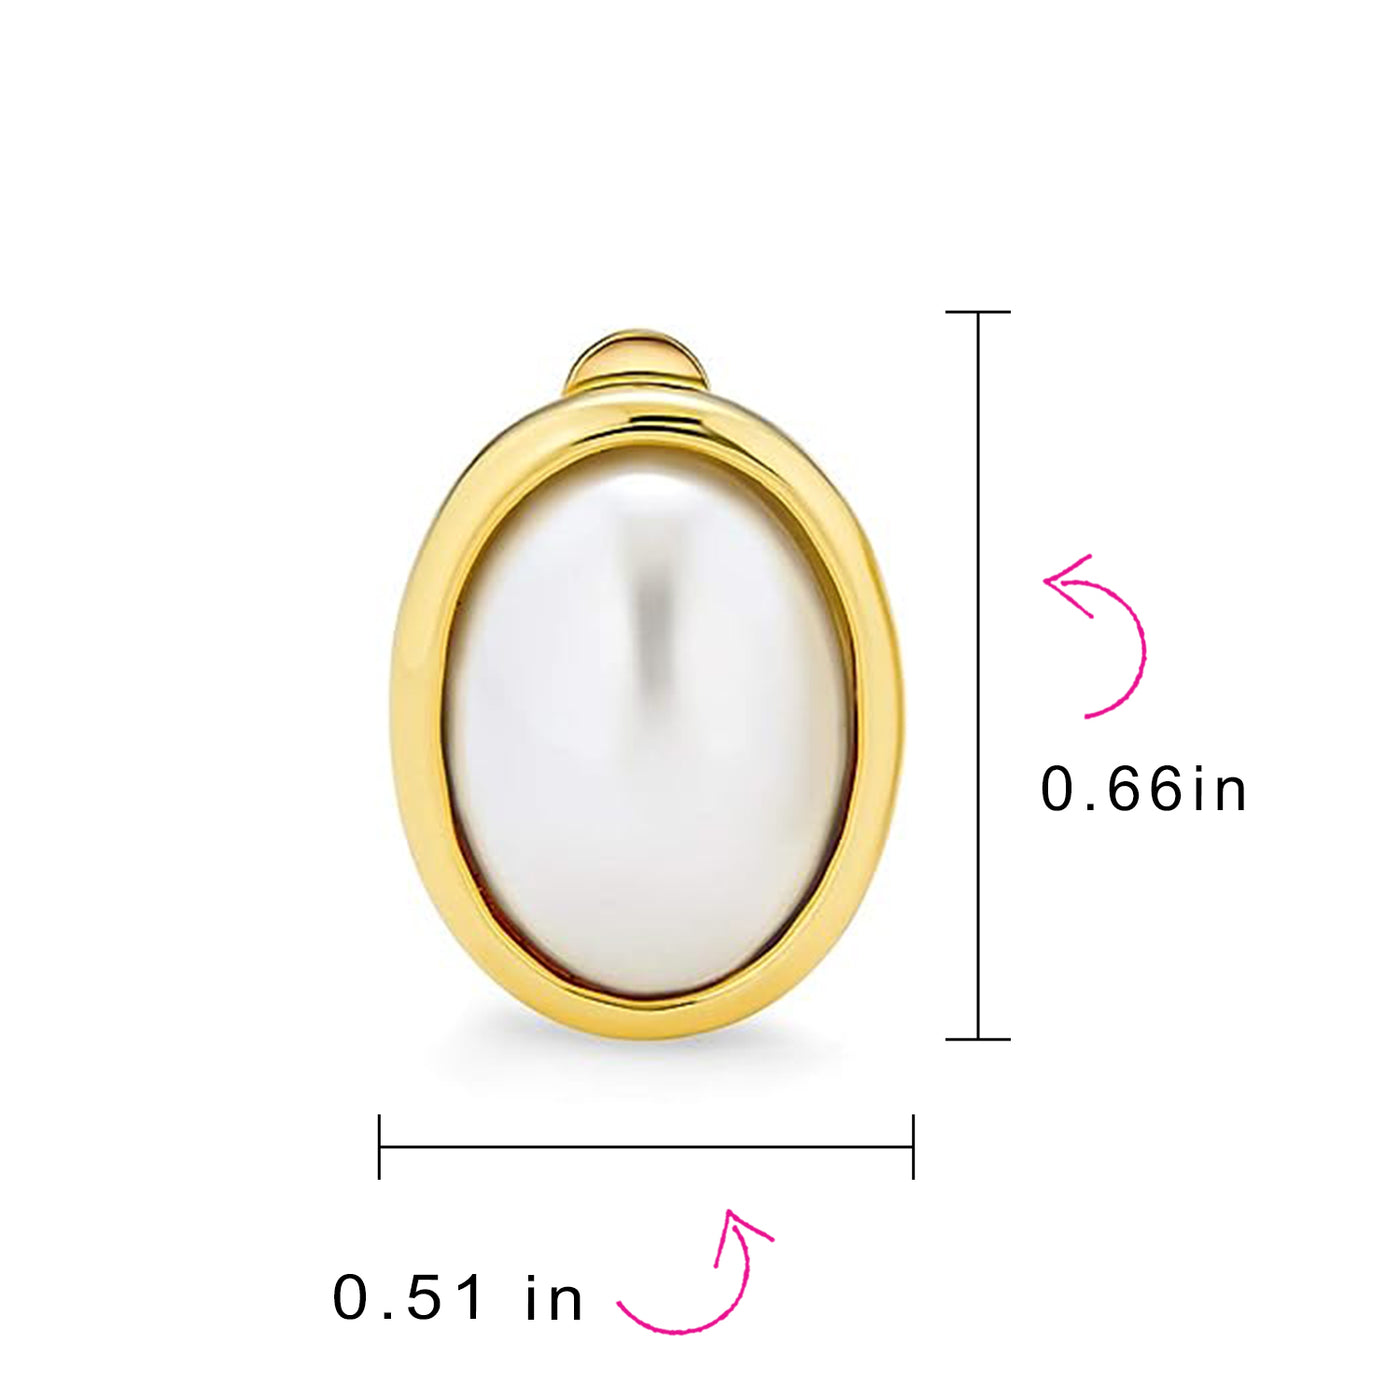 Oval Clip On White Imitation Pearl Earrings Cabochon Gold Plated